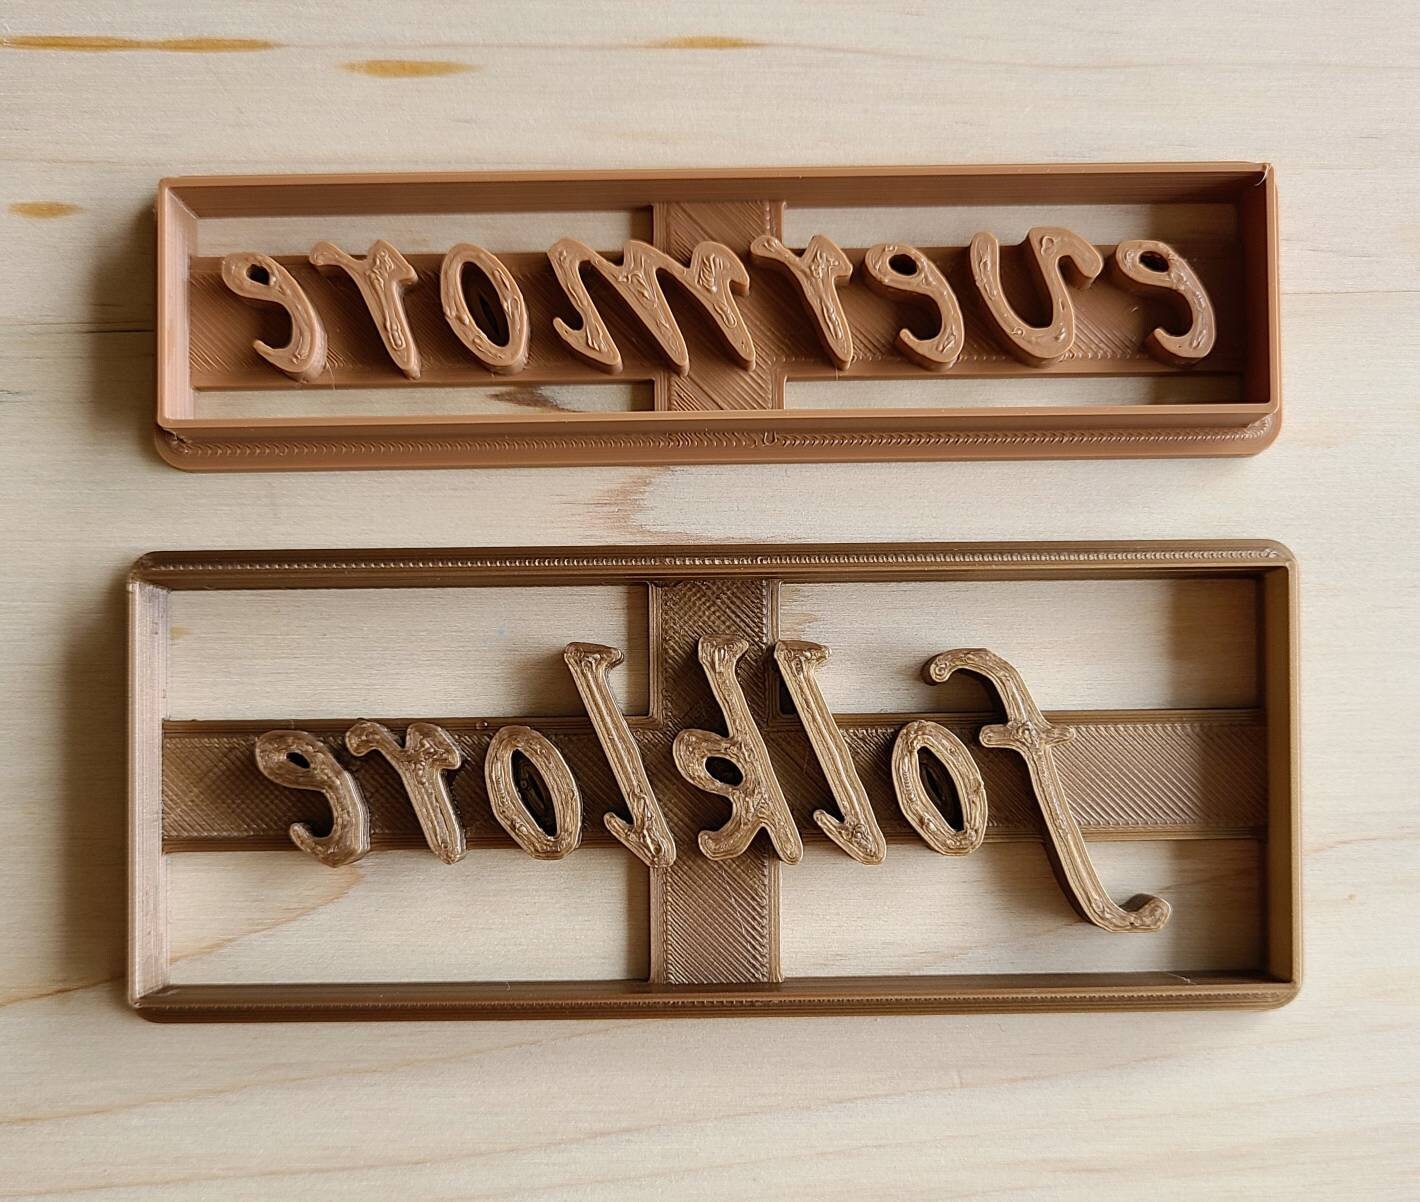 Taylor Swift Cookie Cutter Evermore & Folklore Set